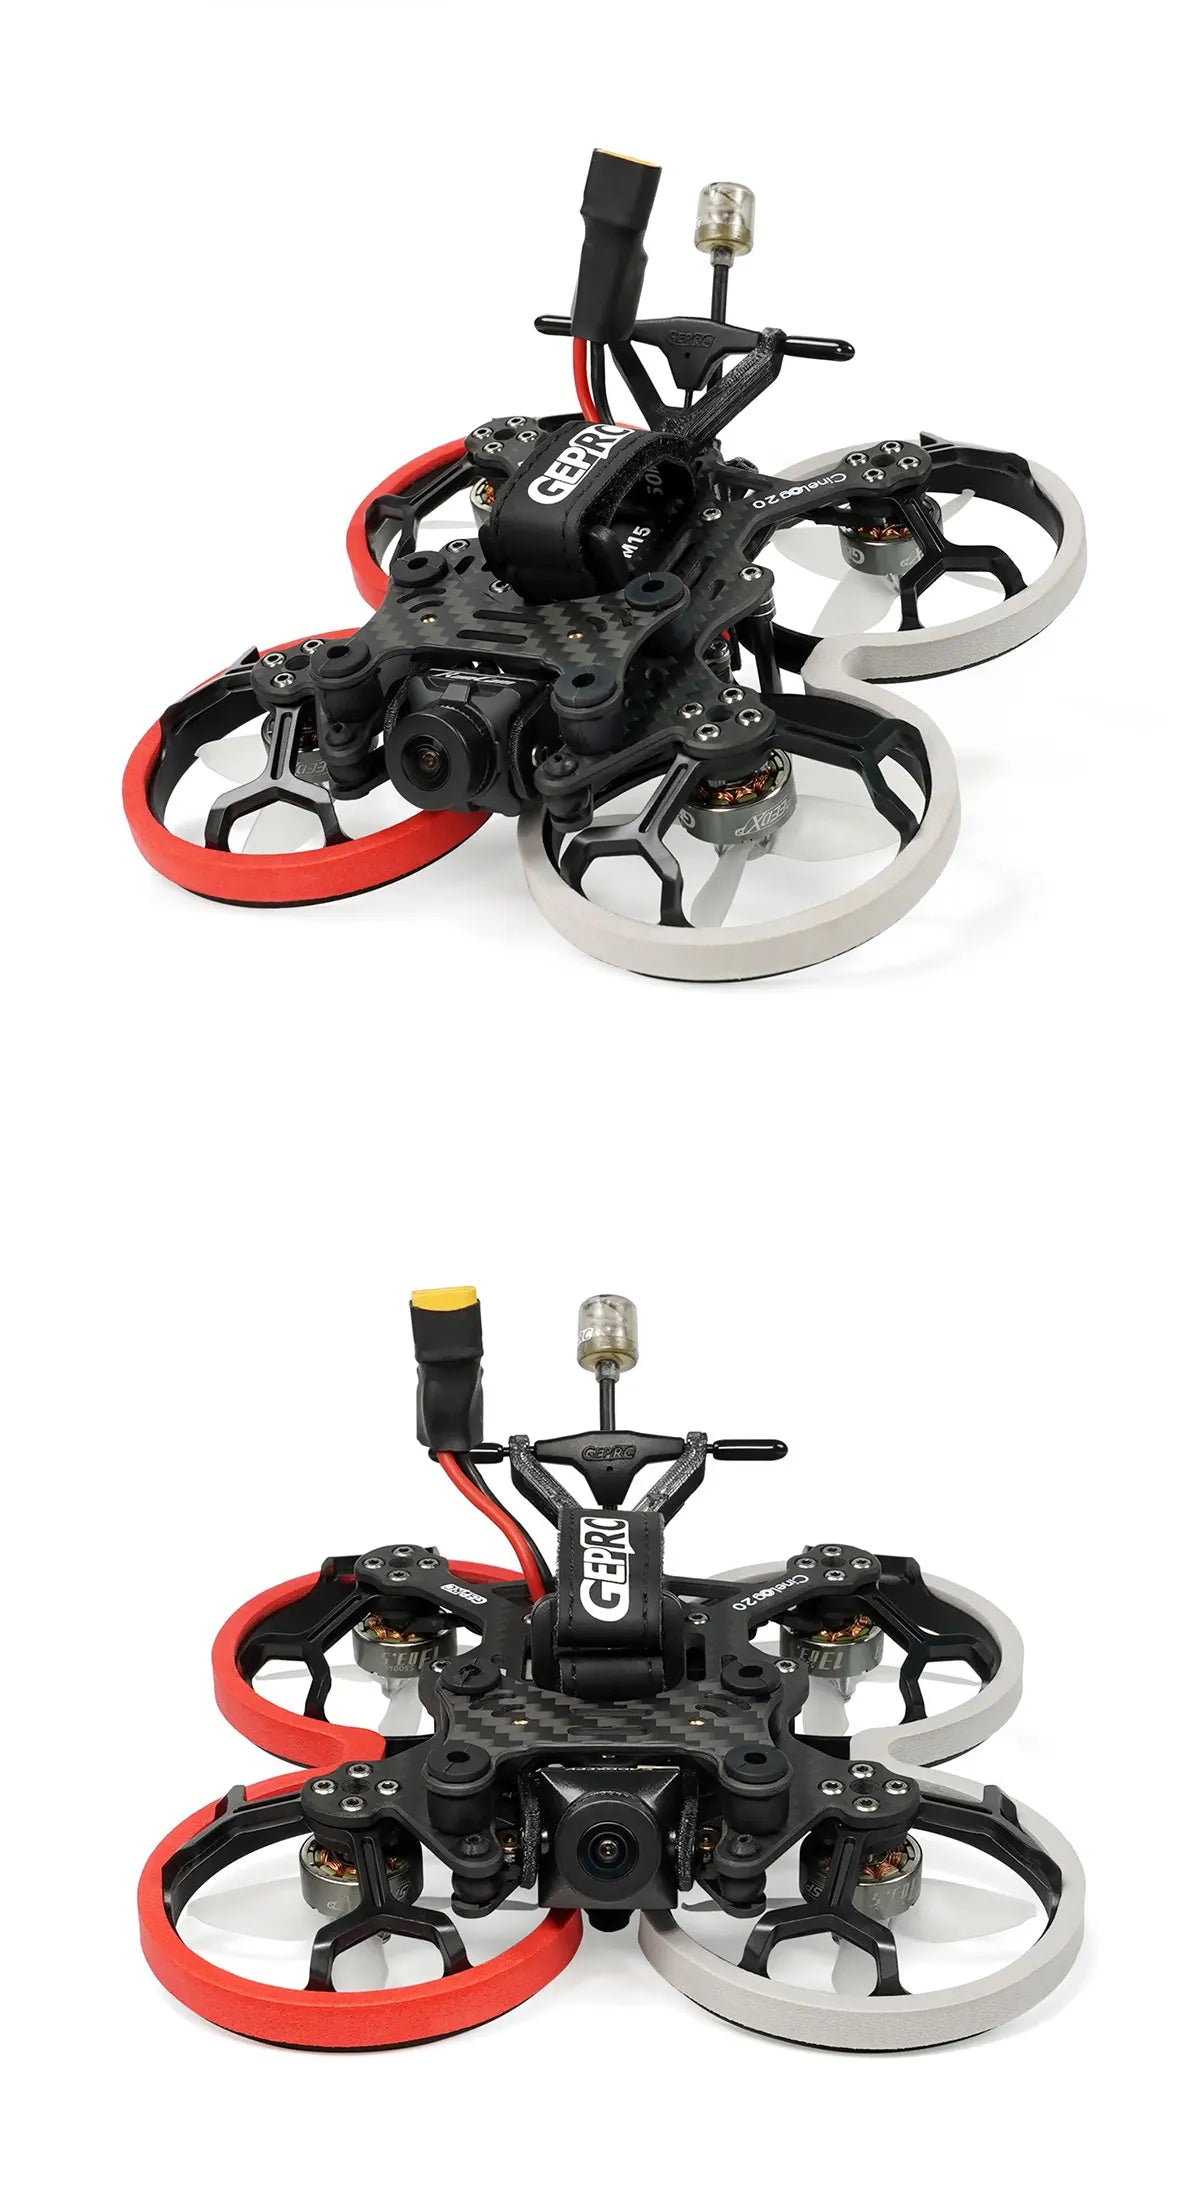 GEPRC Cinelog20 HD, GEPRC's splendid tuning and the overall flight feel are delicate and flexible.